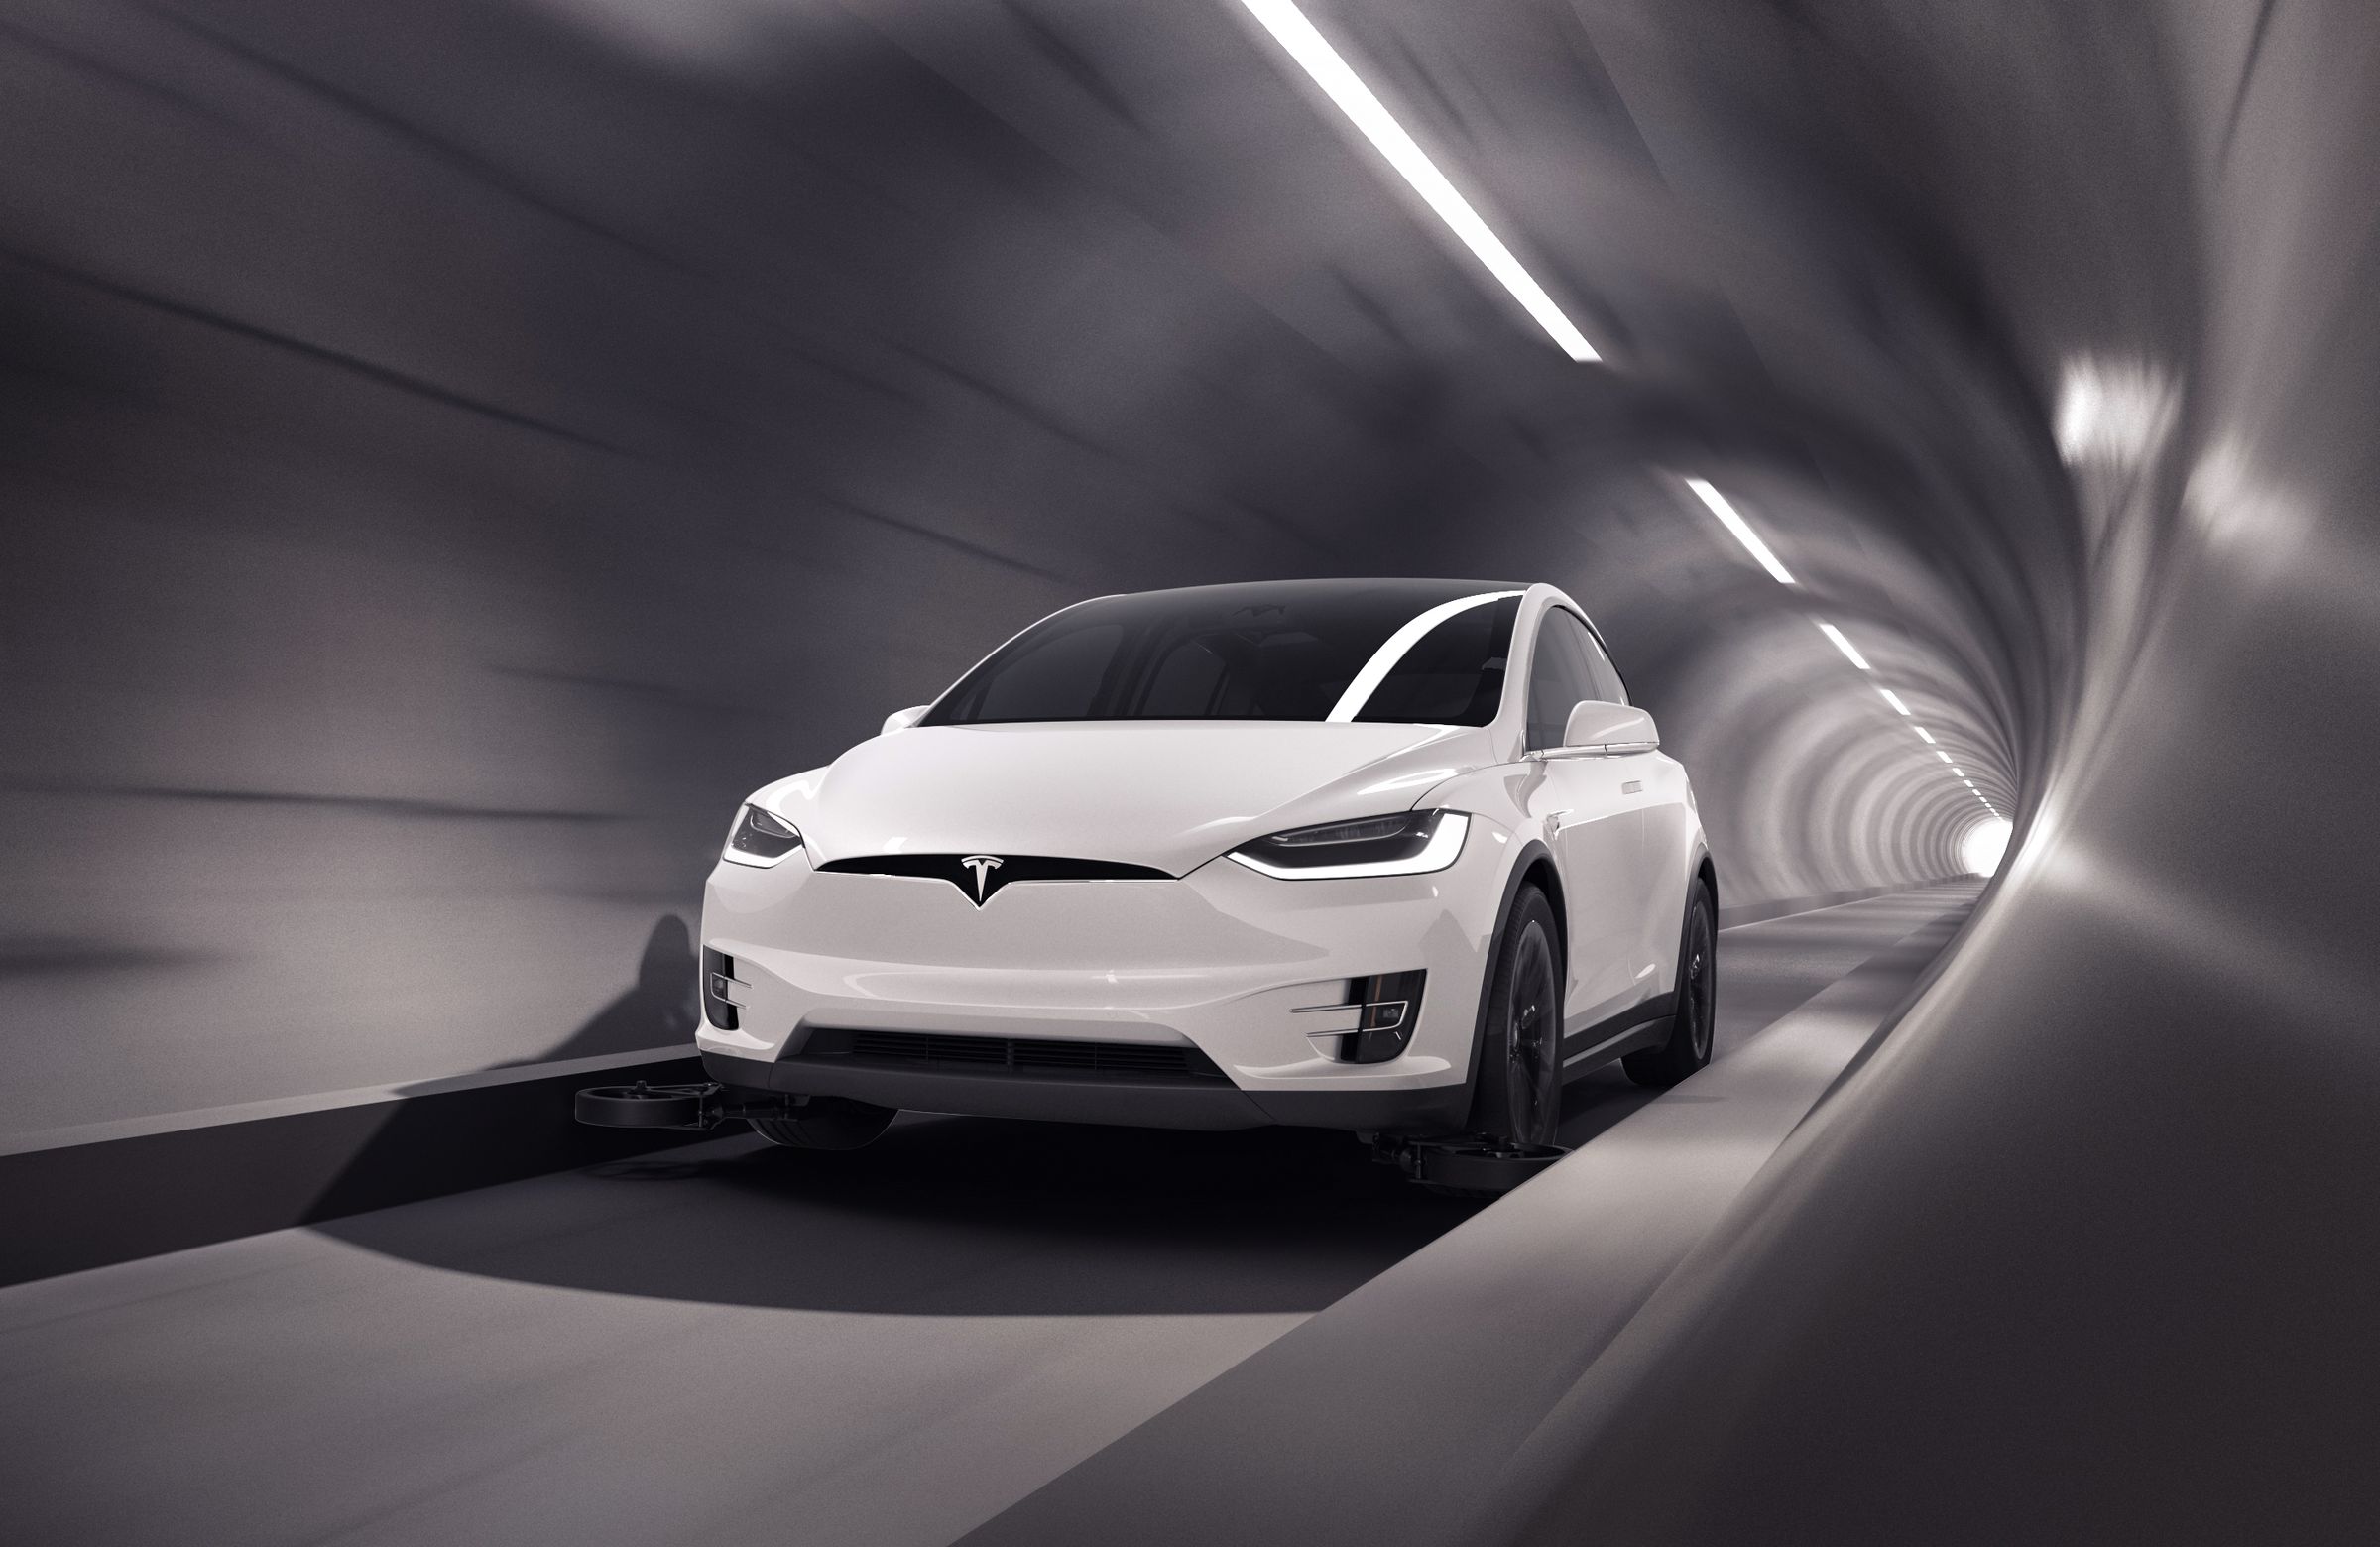 Rendering of a Tesla driving through a tunnel